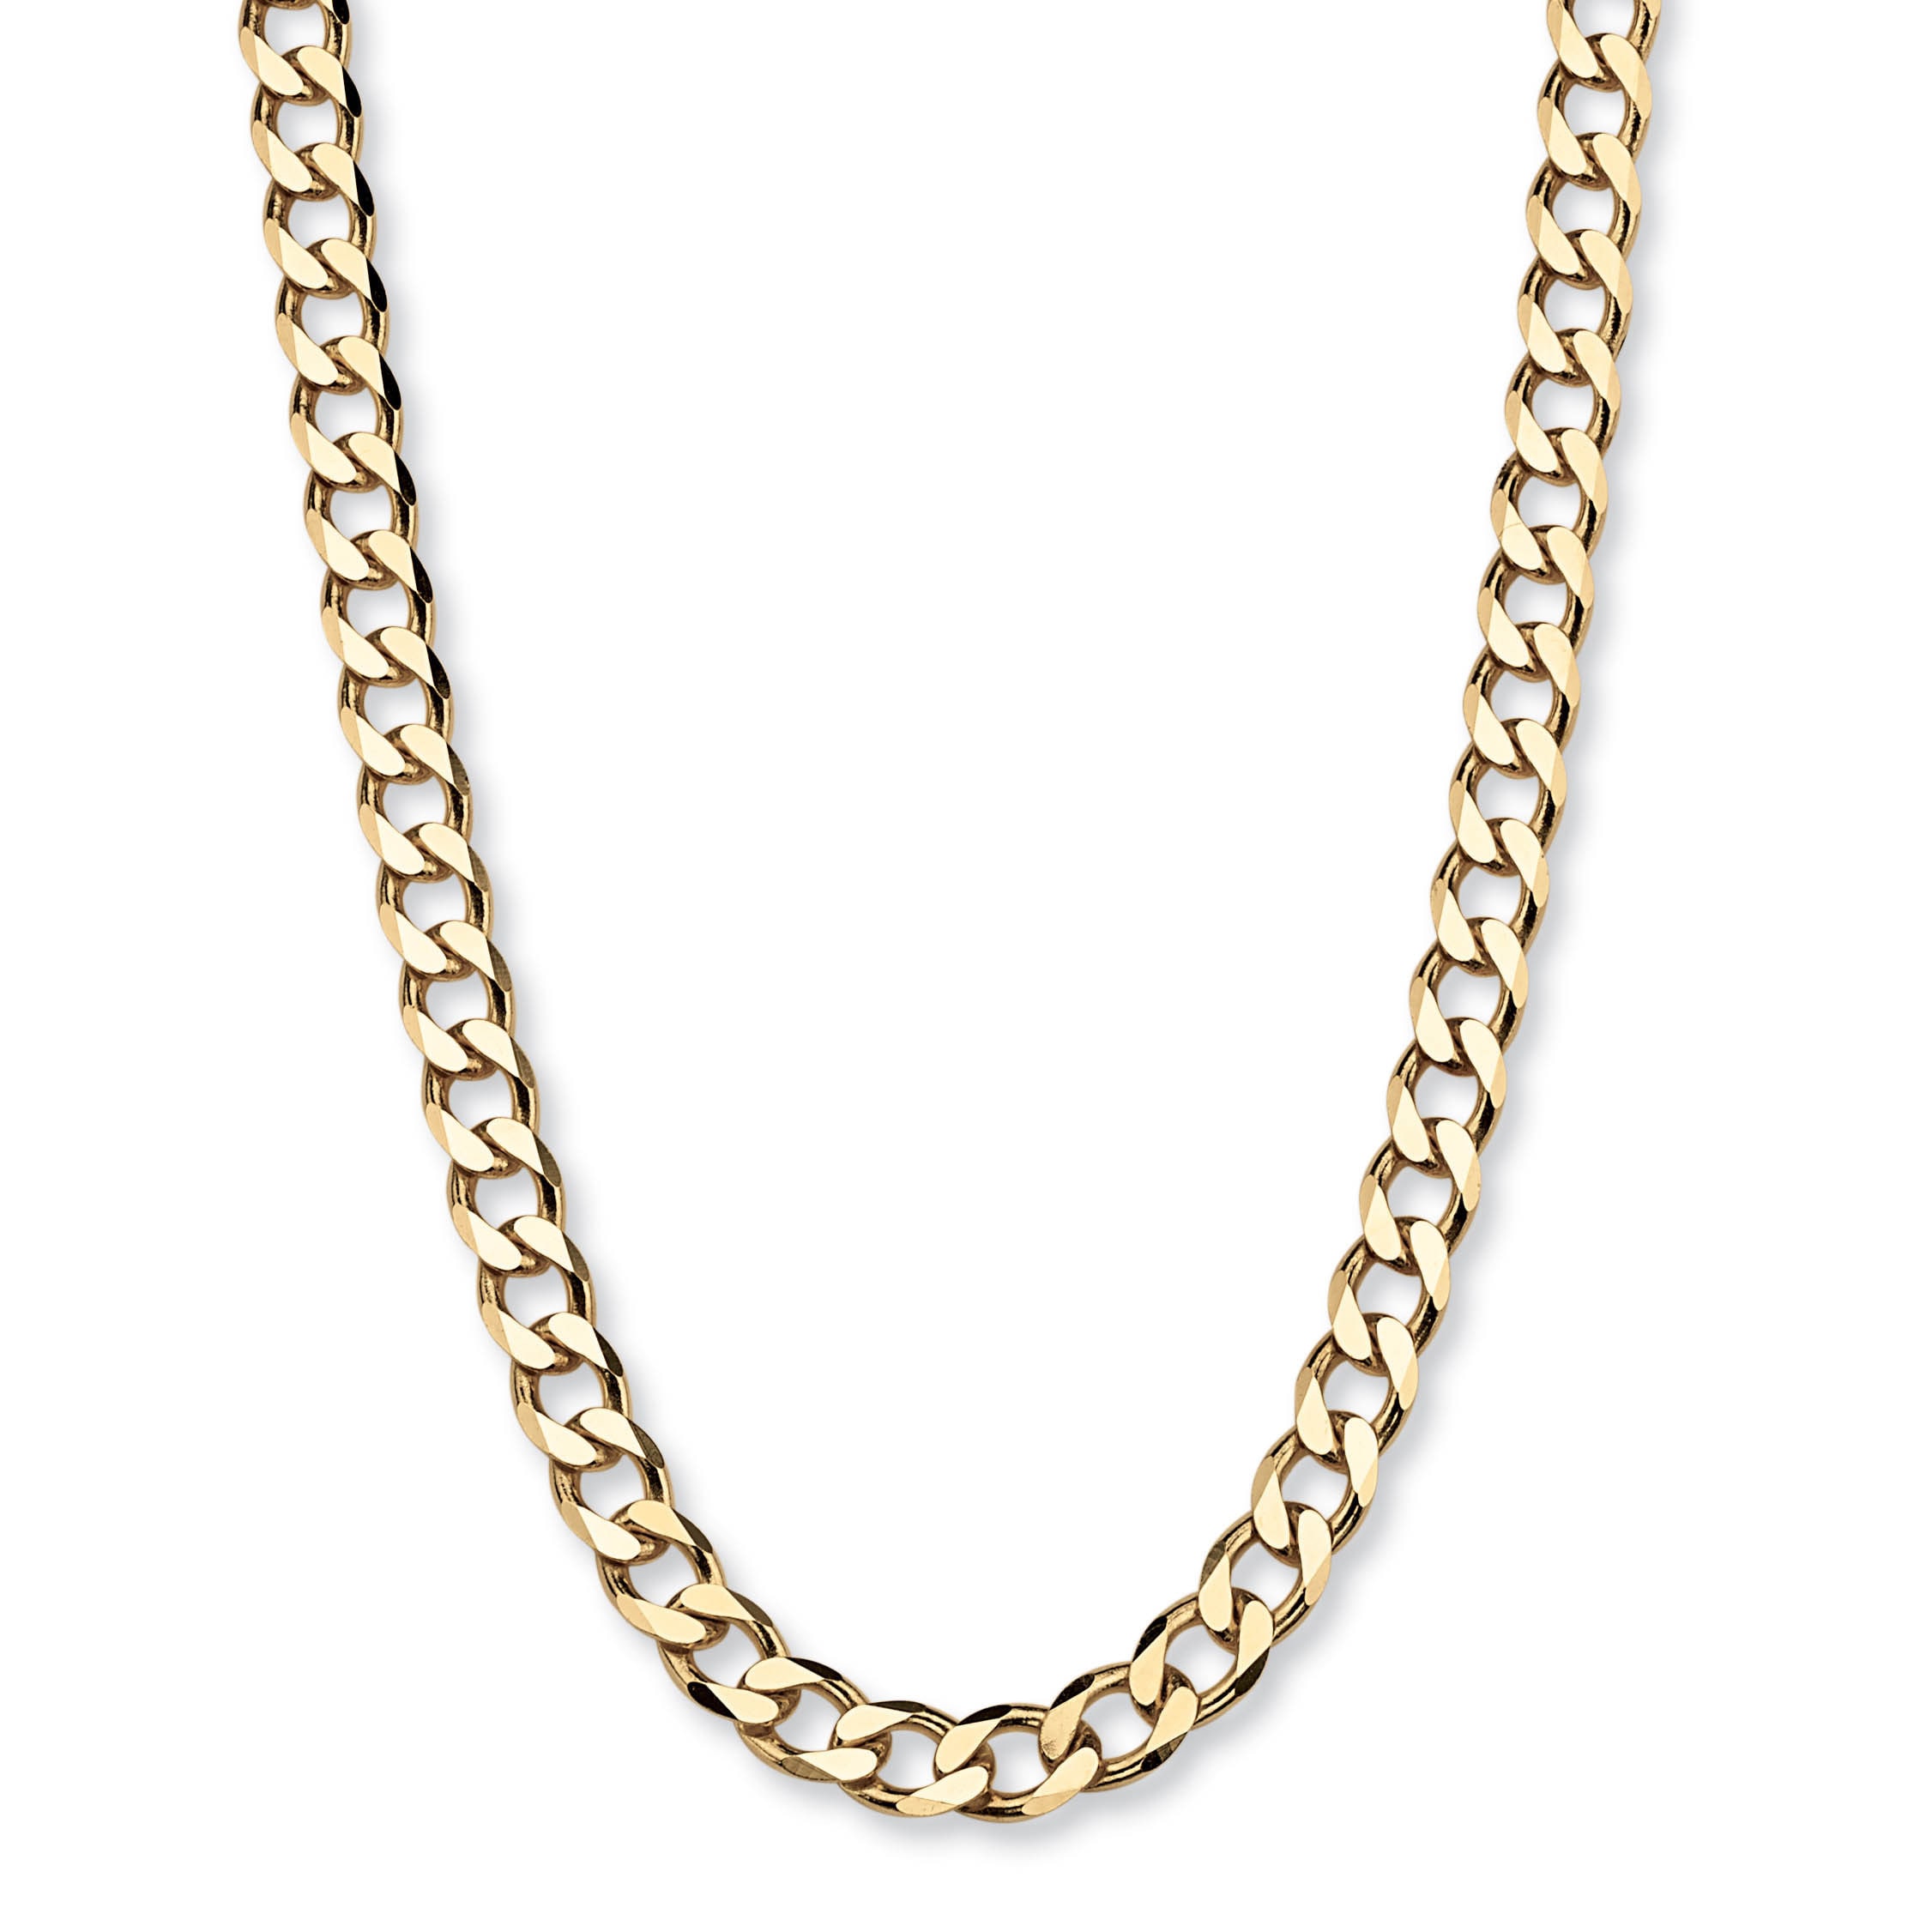 Shop Curb-Link Chain in 18k Gold over 